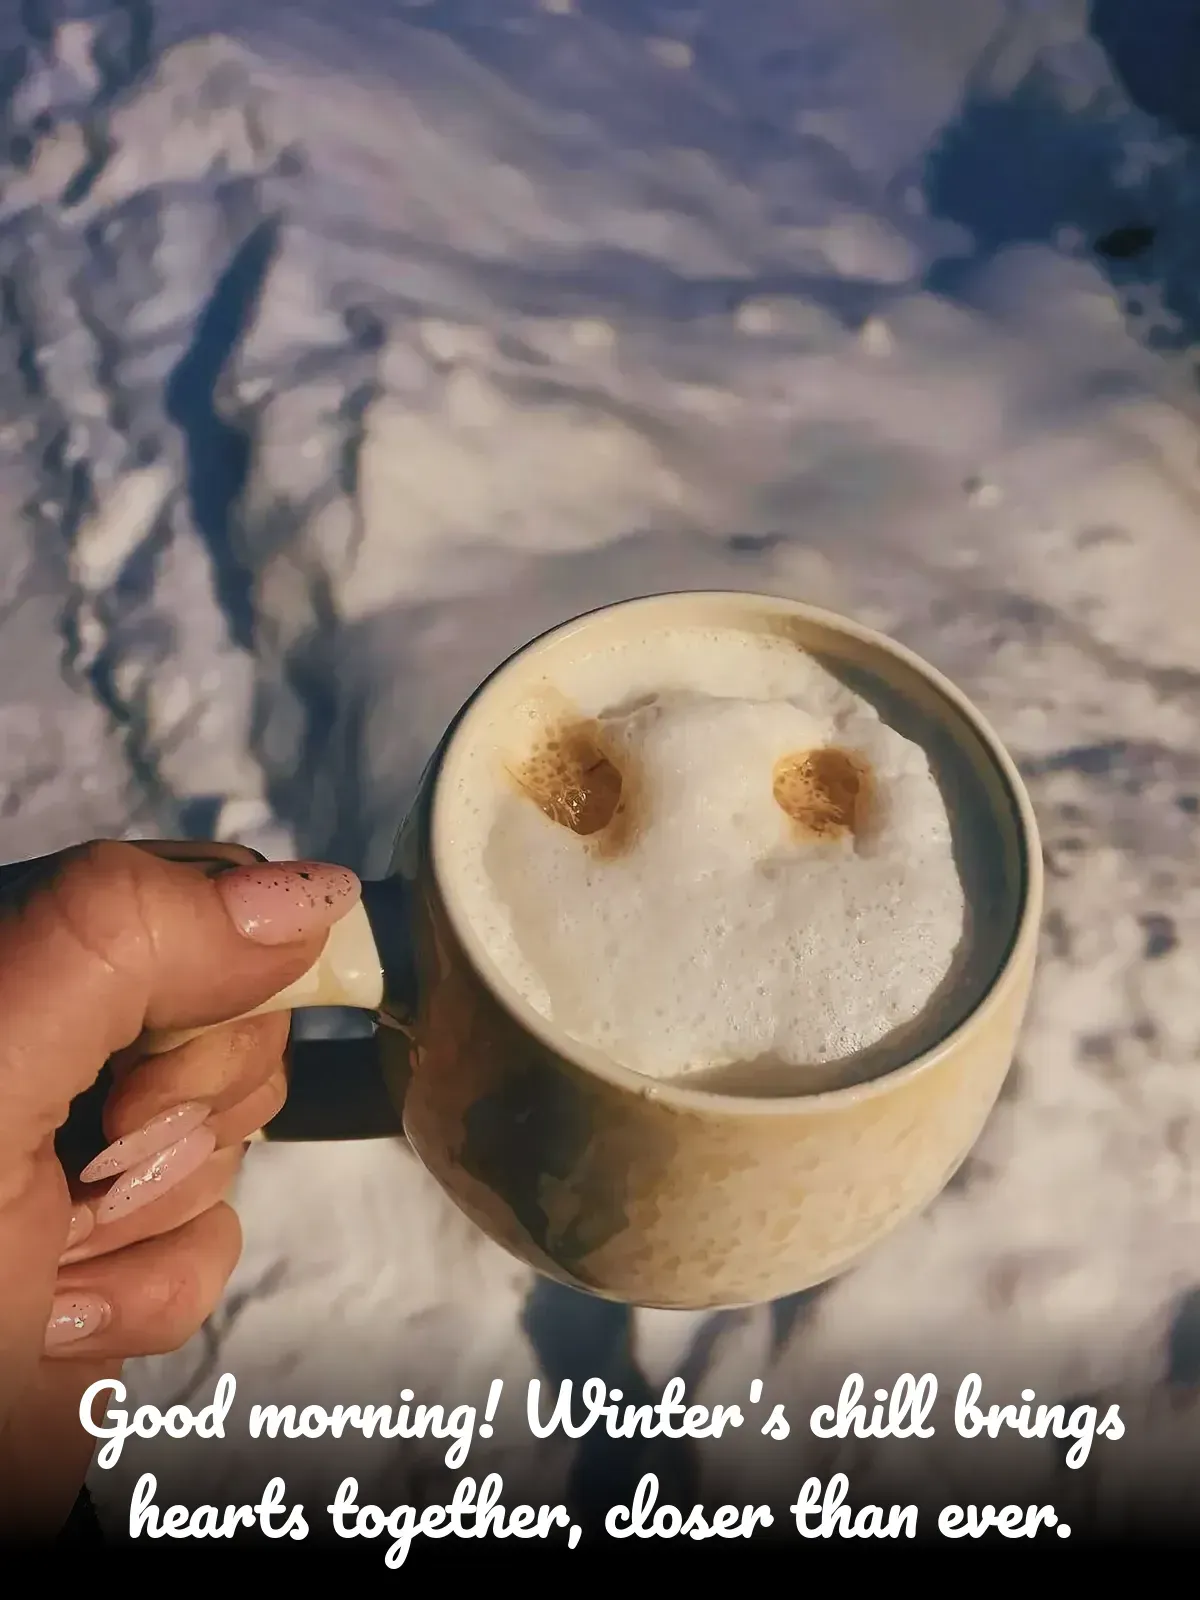 A hand holding a coffee mug with a unique design on it, surrounded by winter scenery.